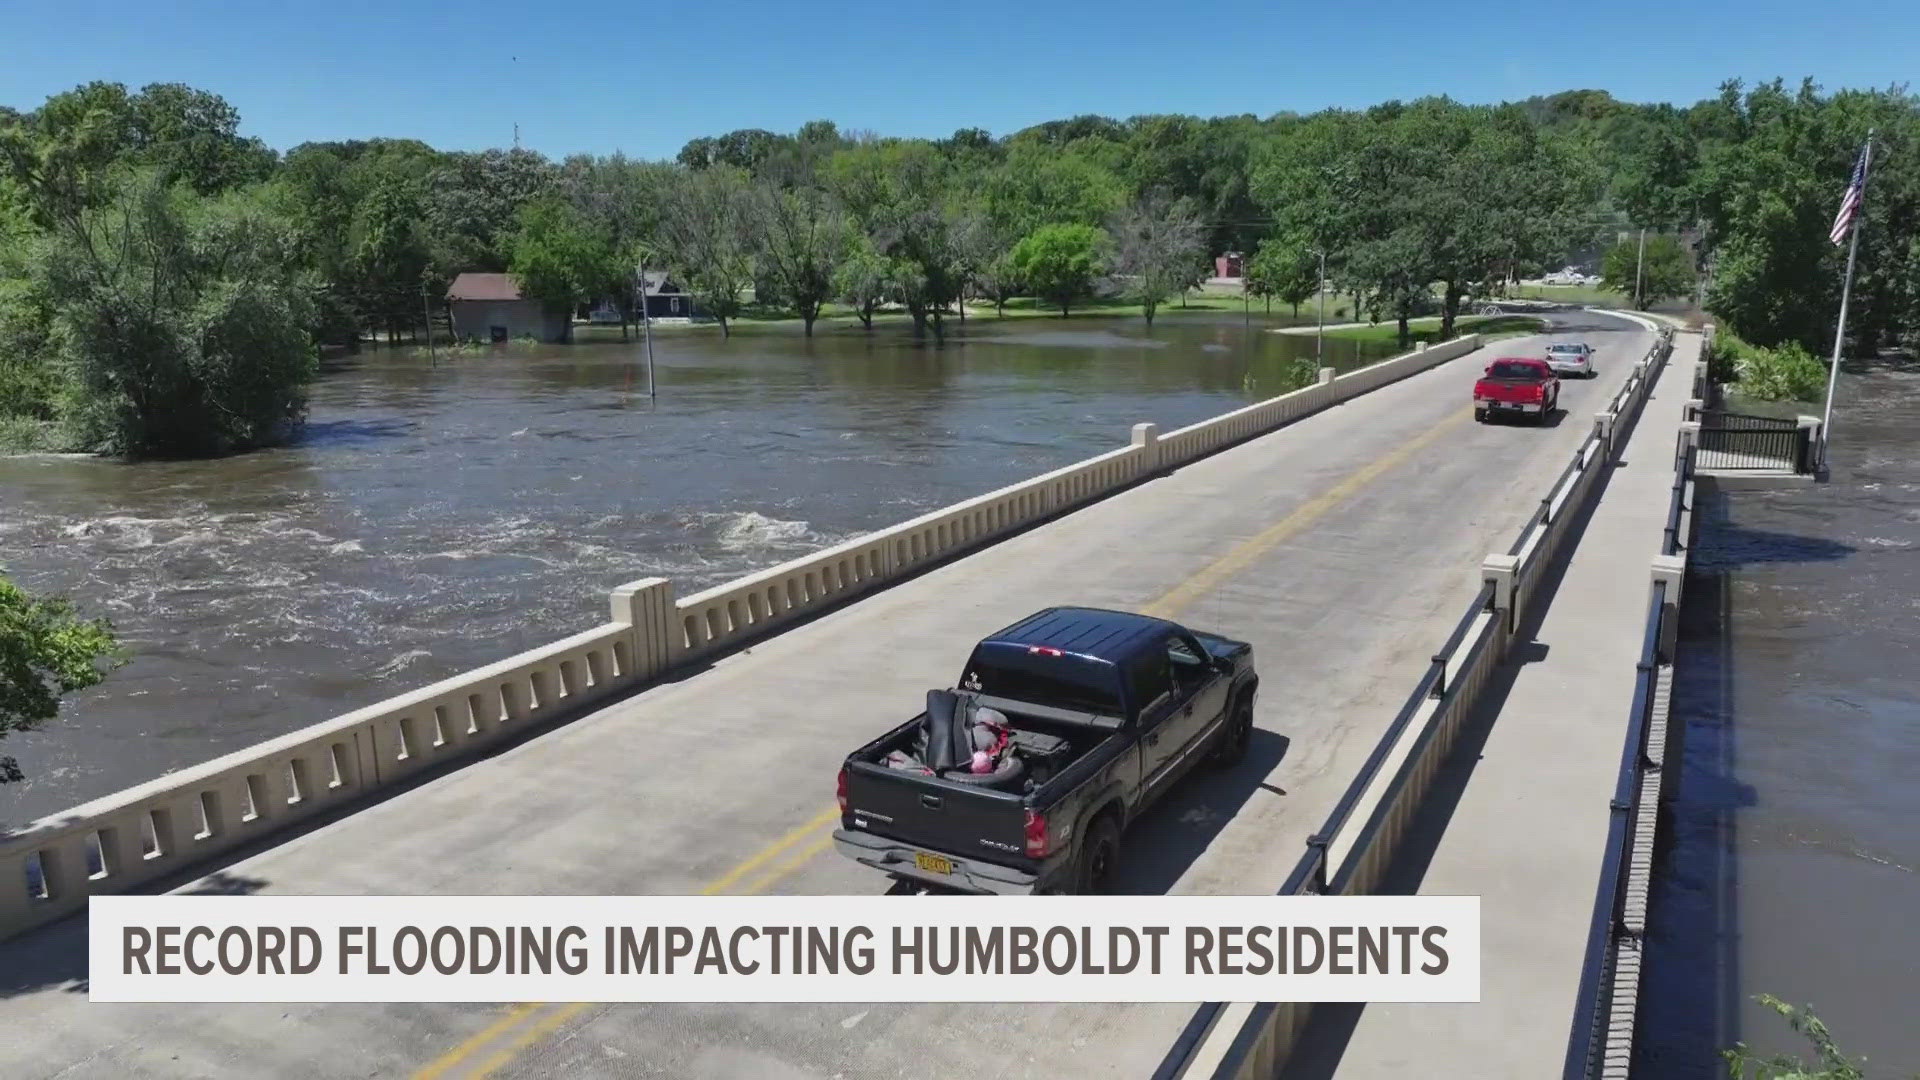 Residents of Humboldt Iowa prepare for flooding as the Des Moines river nears its crest.